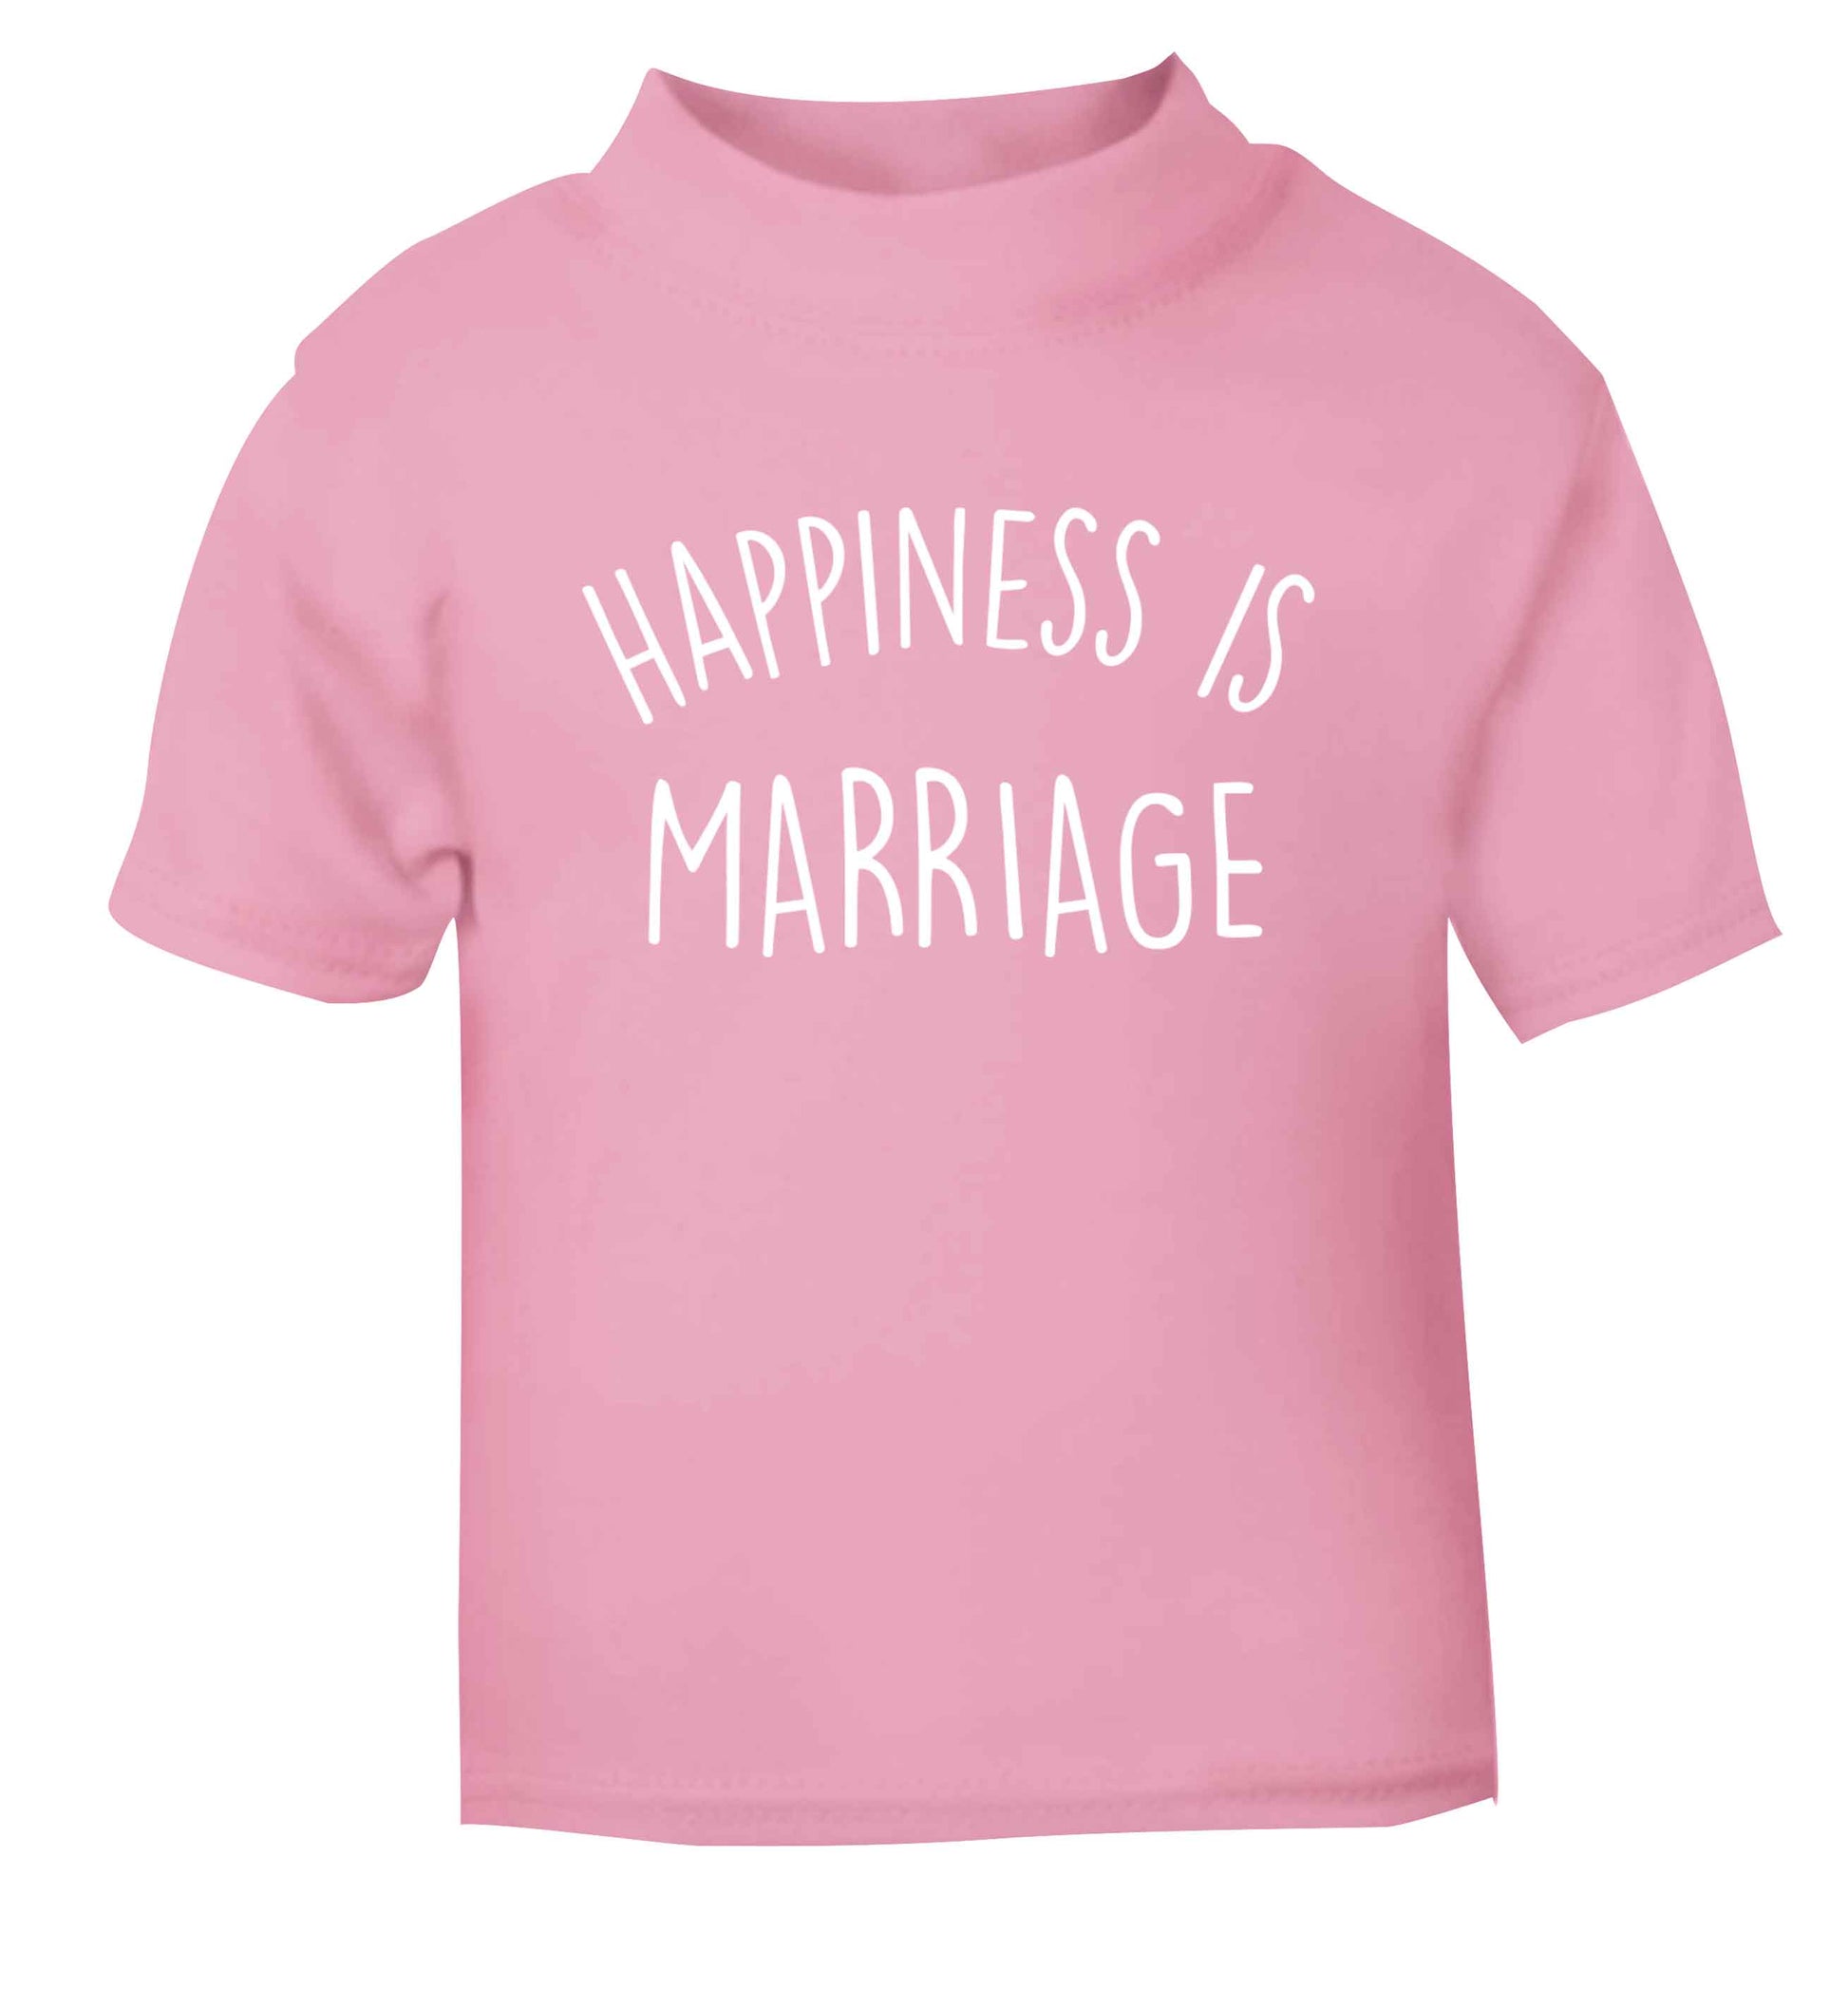 Happiness is wedding planning light pink baby toddler Tshirt 2 Years